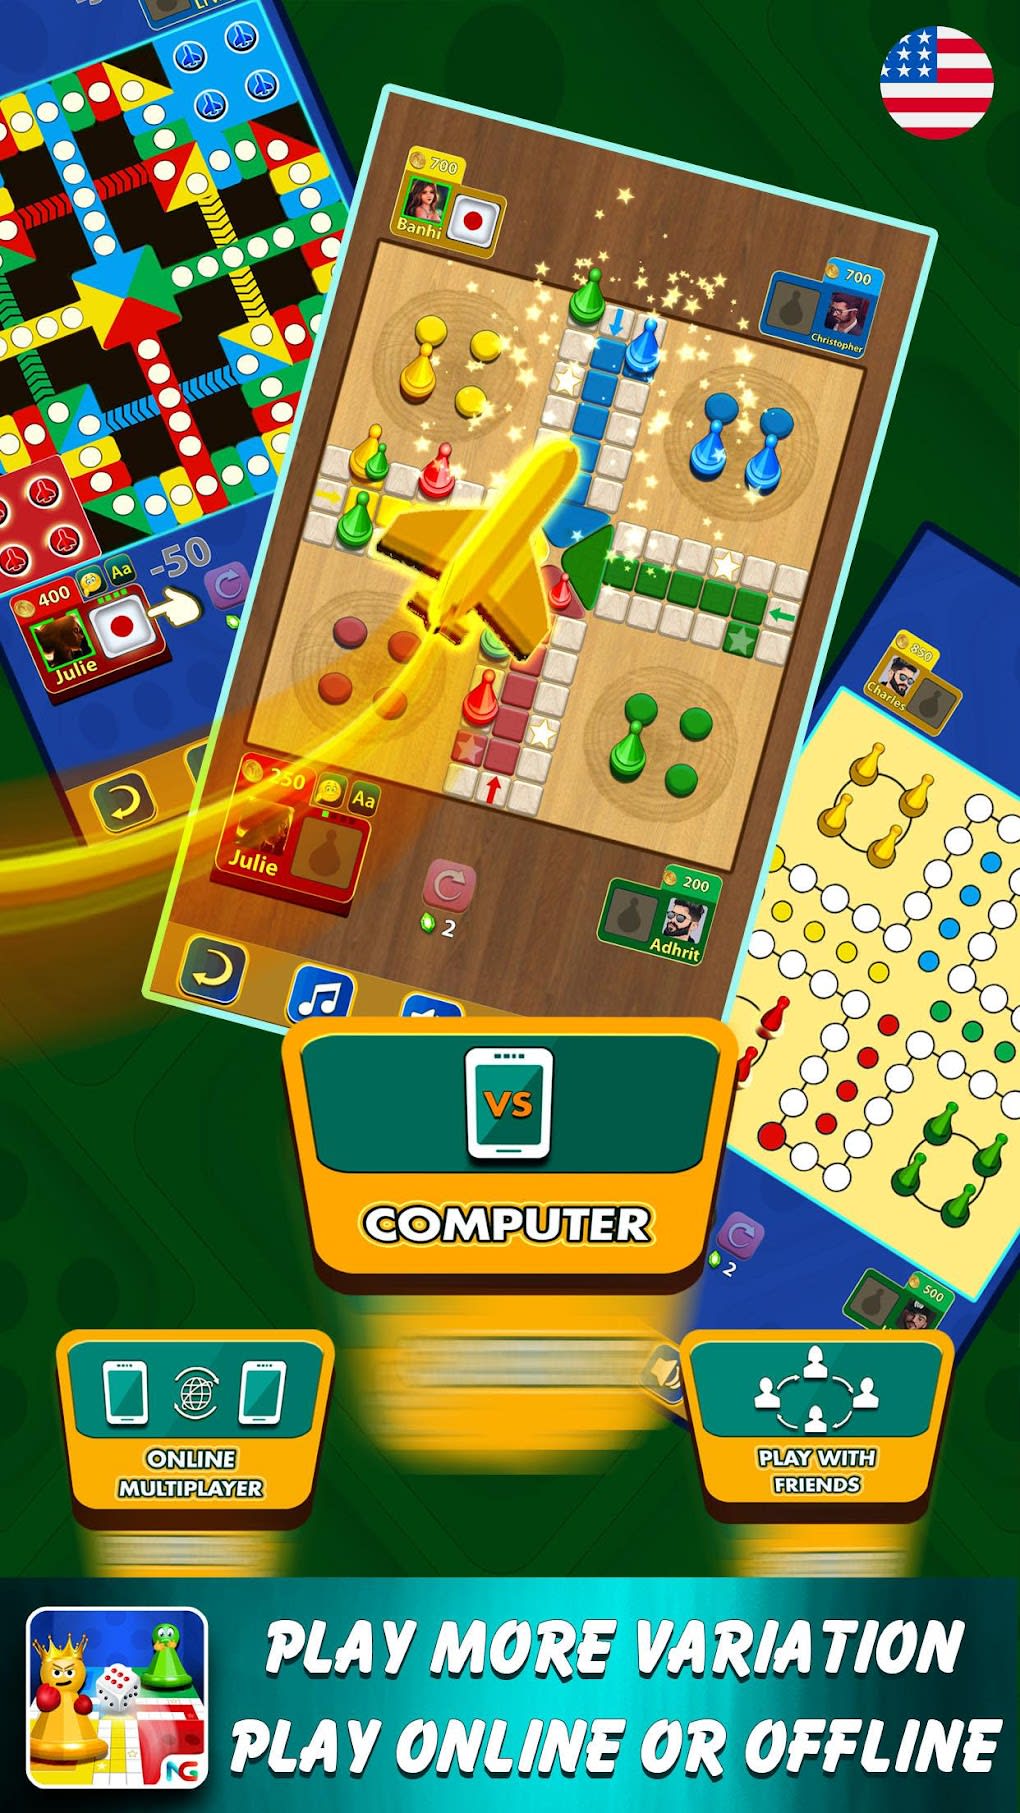 Download Ludo Club 2.3.86 for Android 